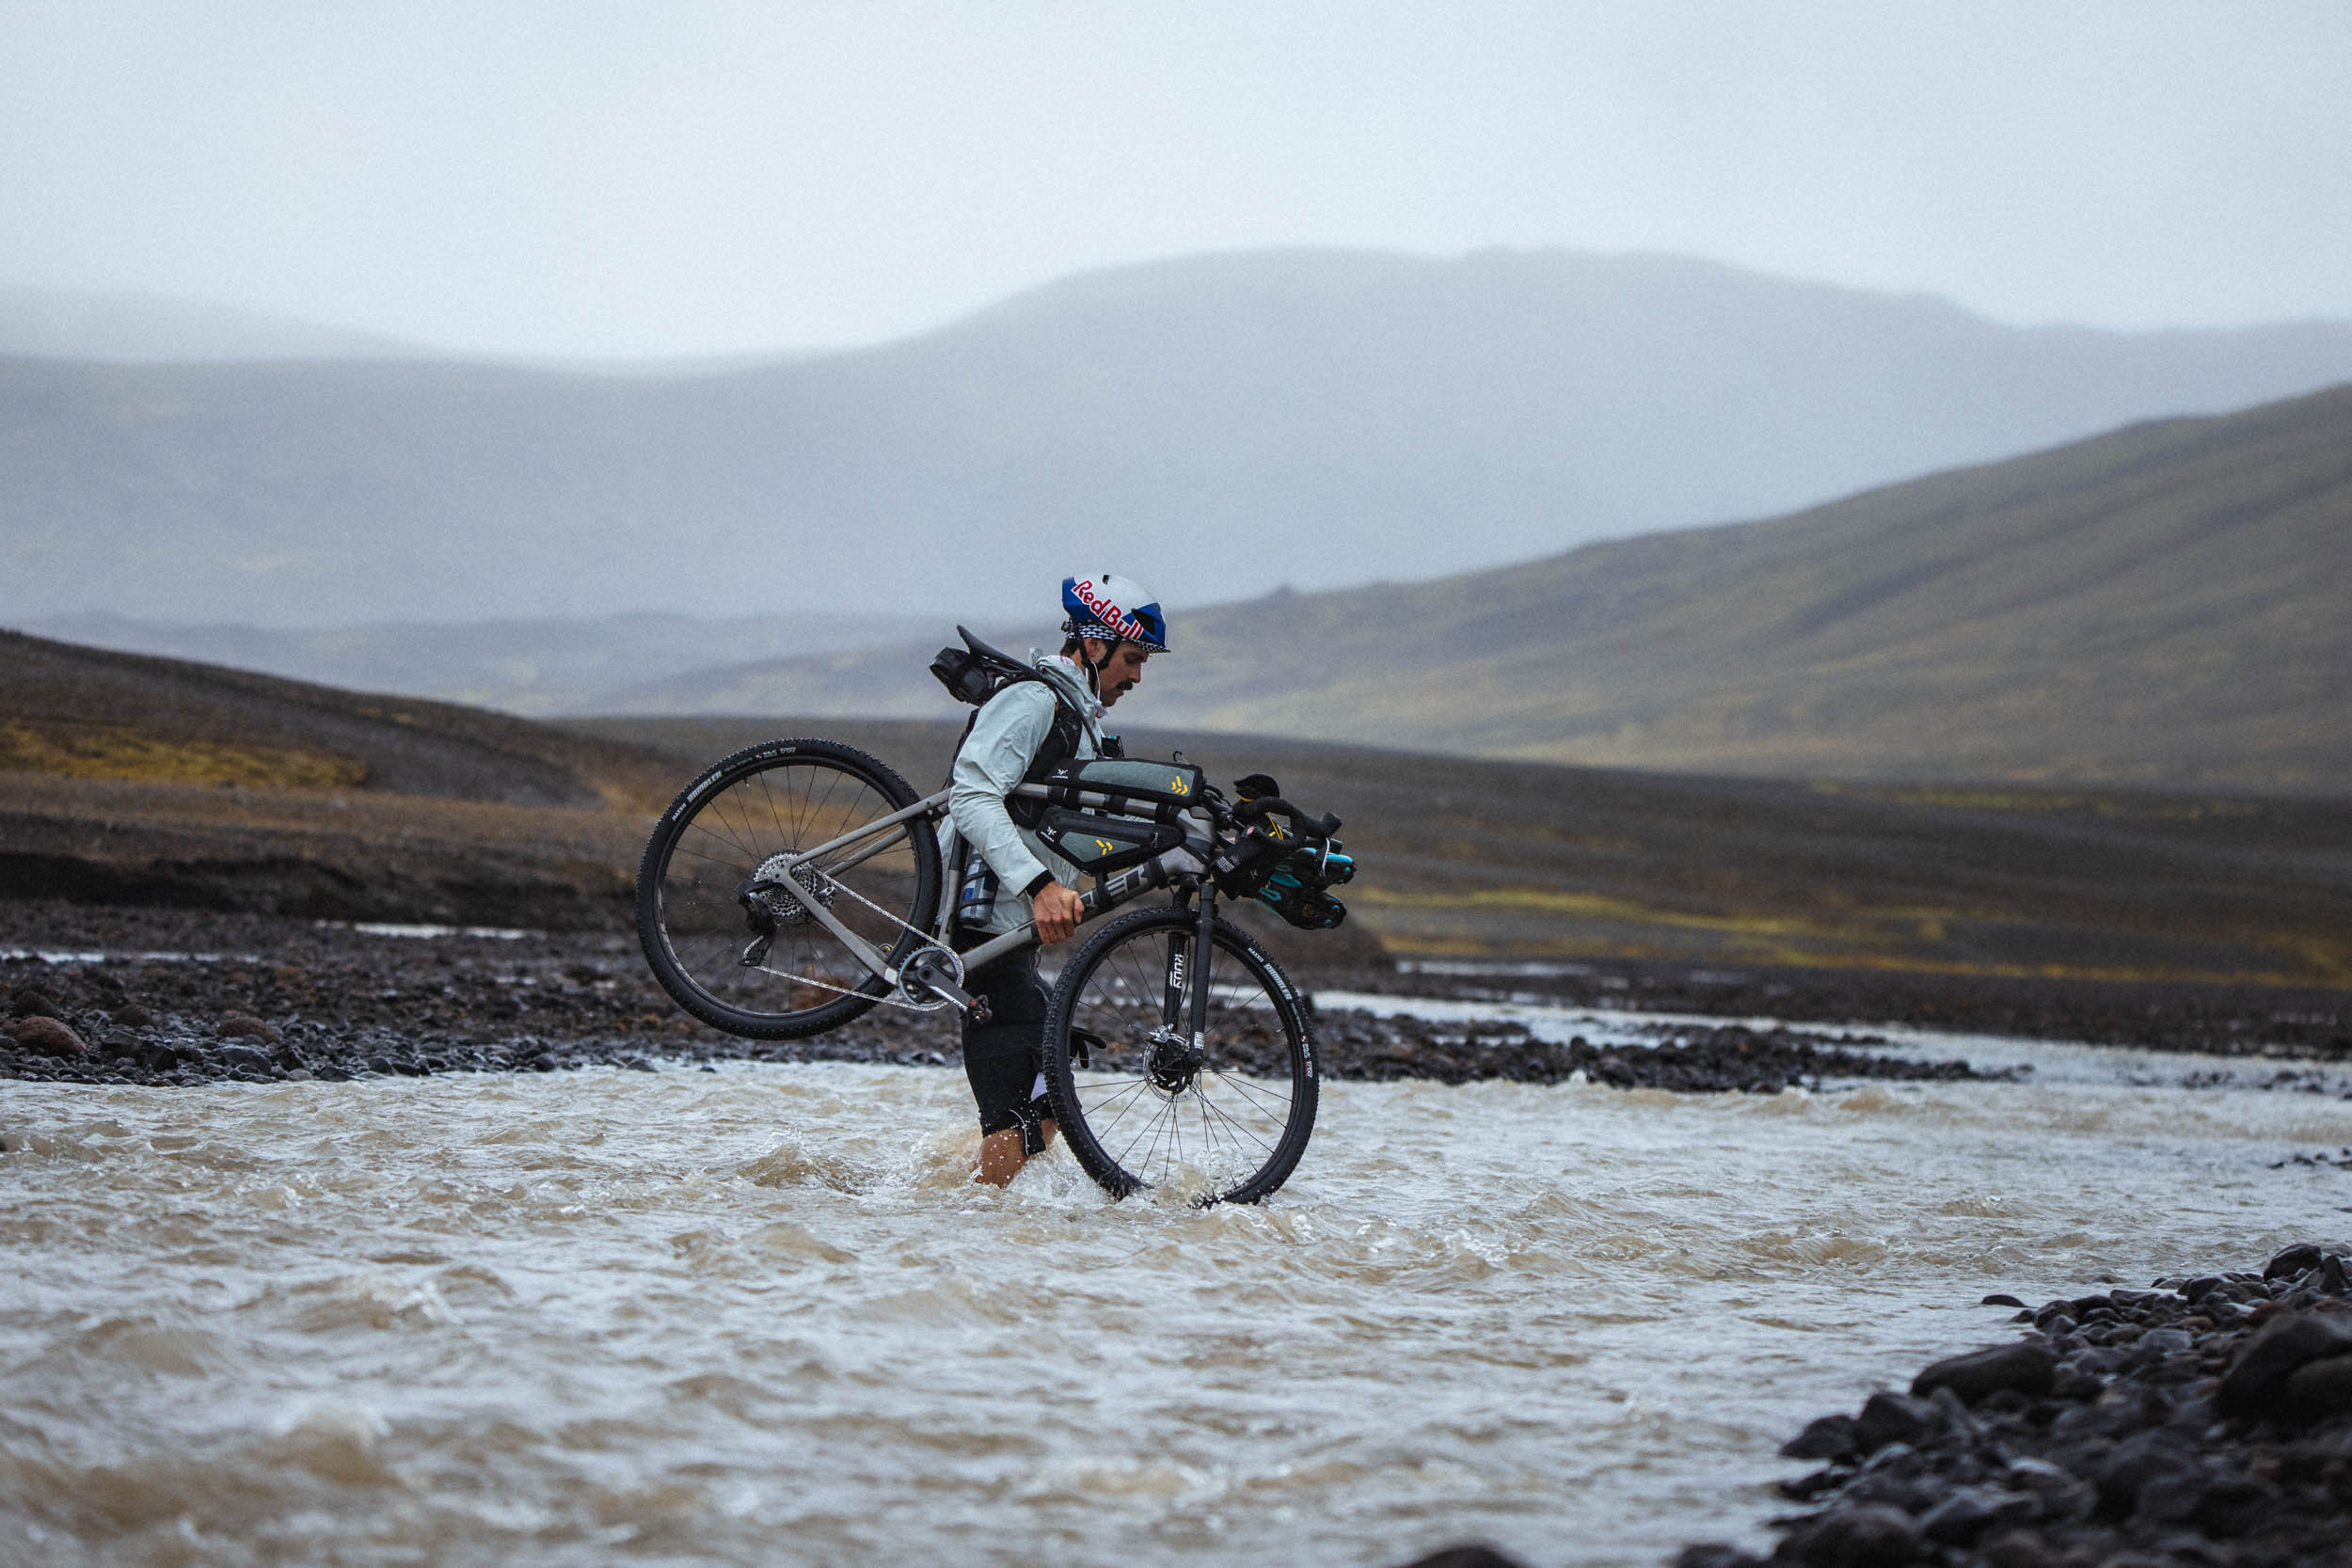 Crossing Iceland, Payson McElveen